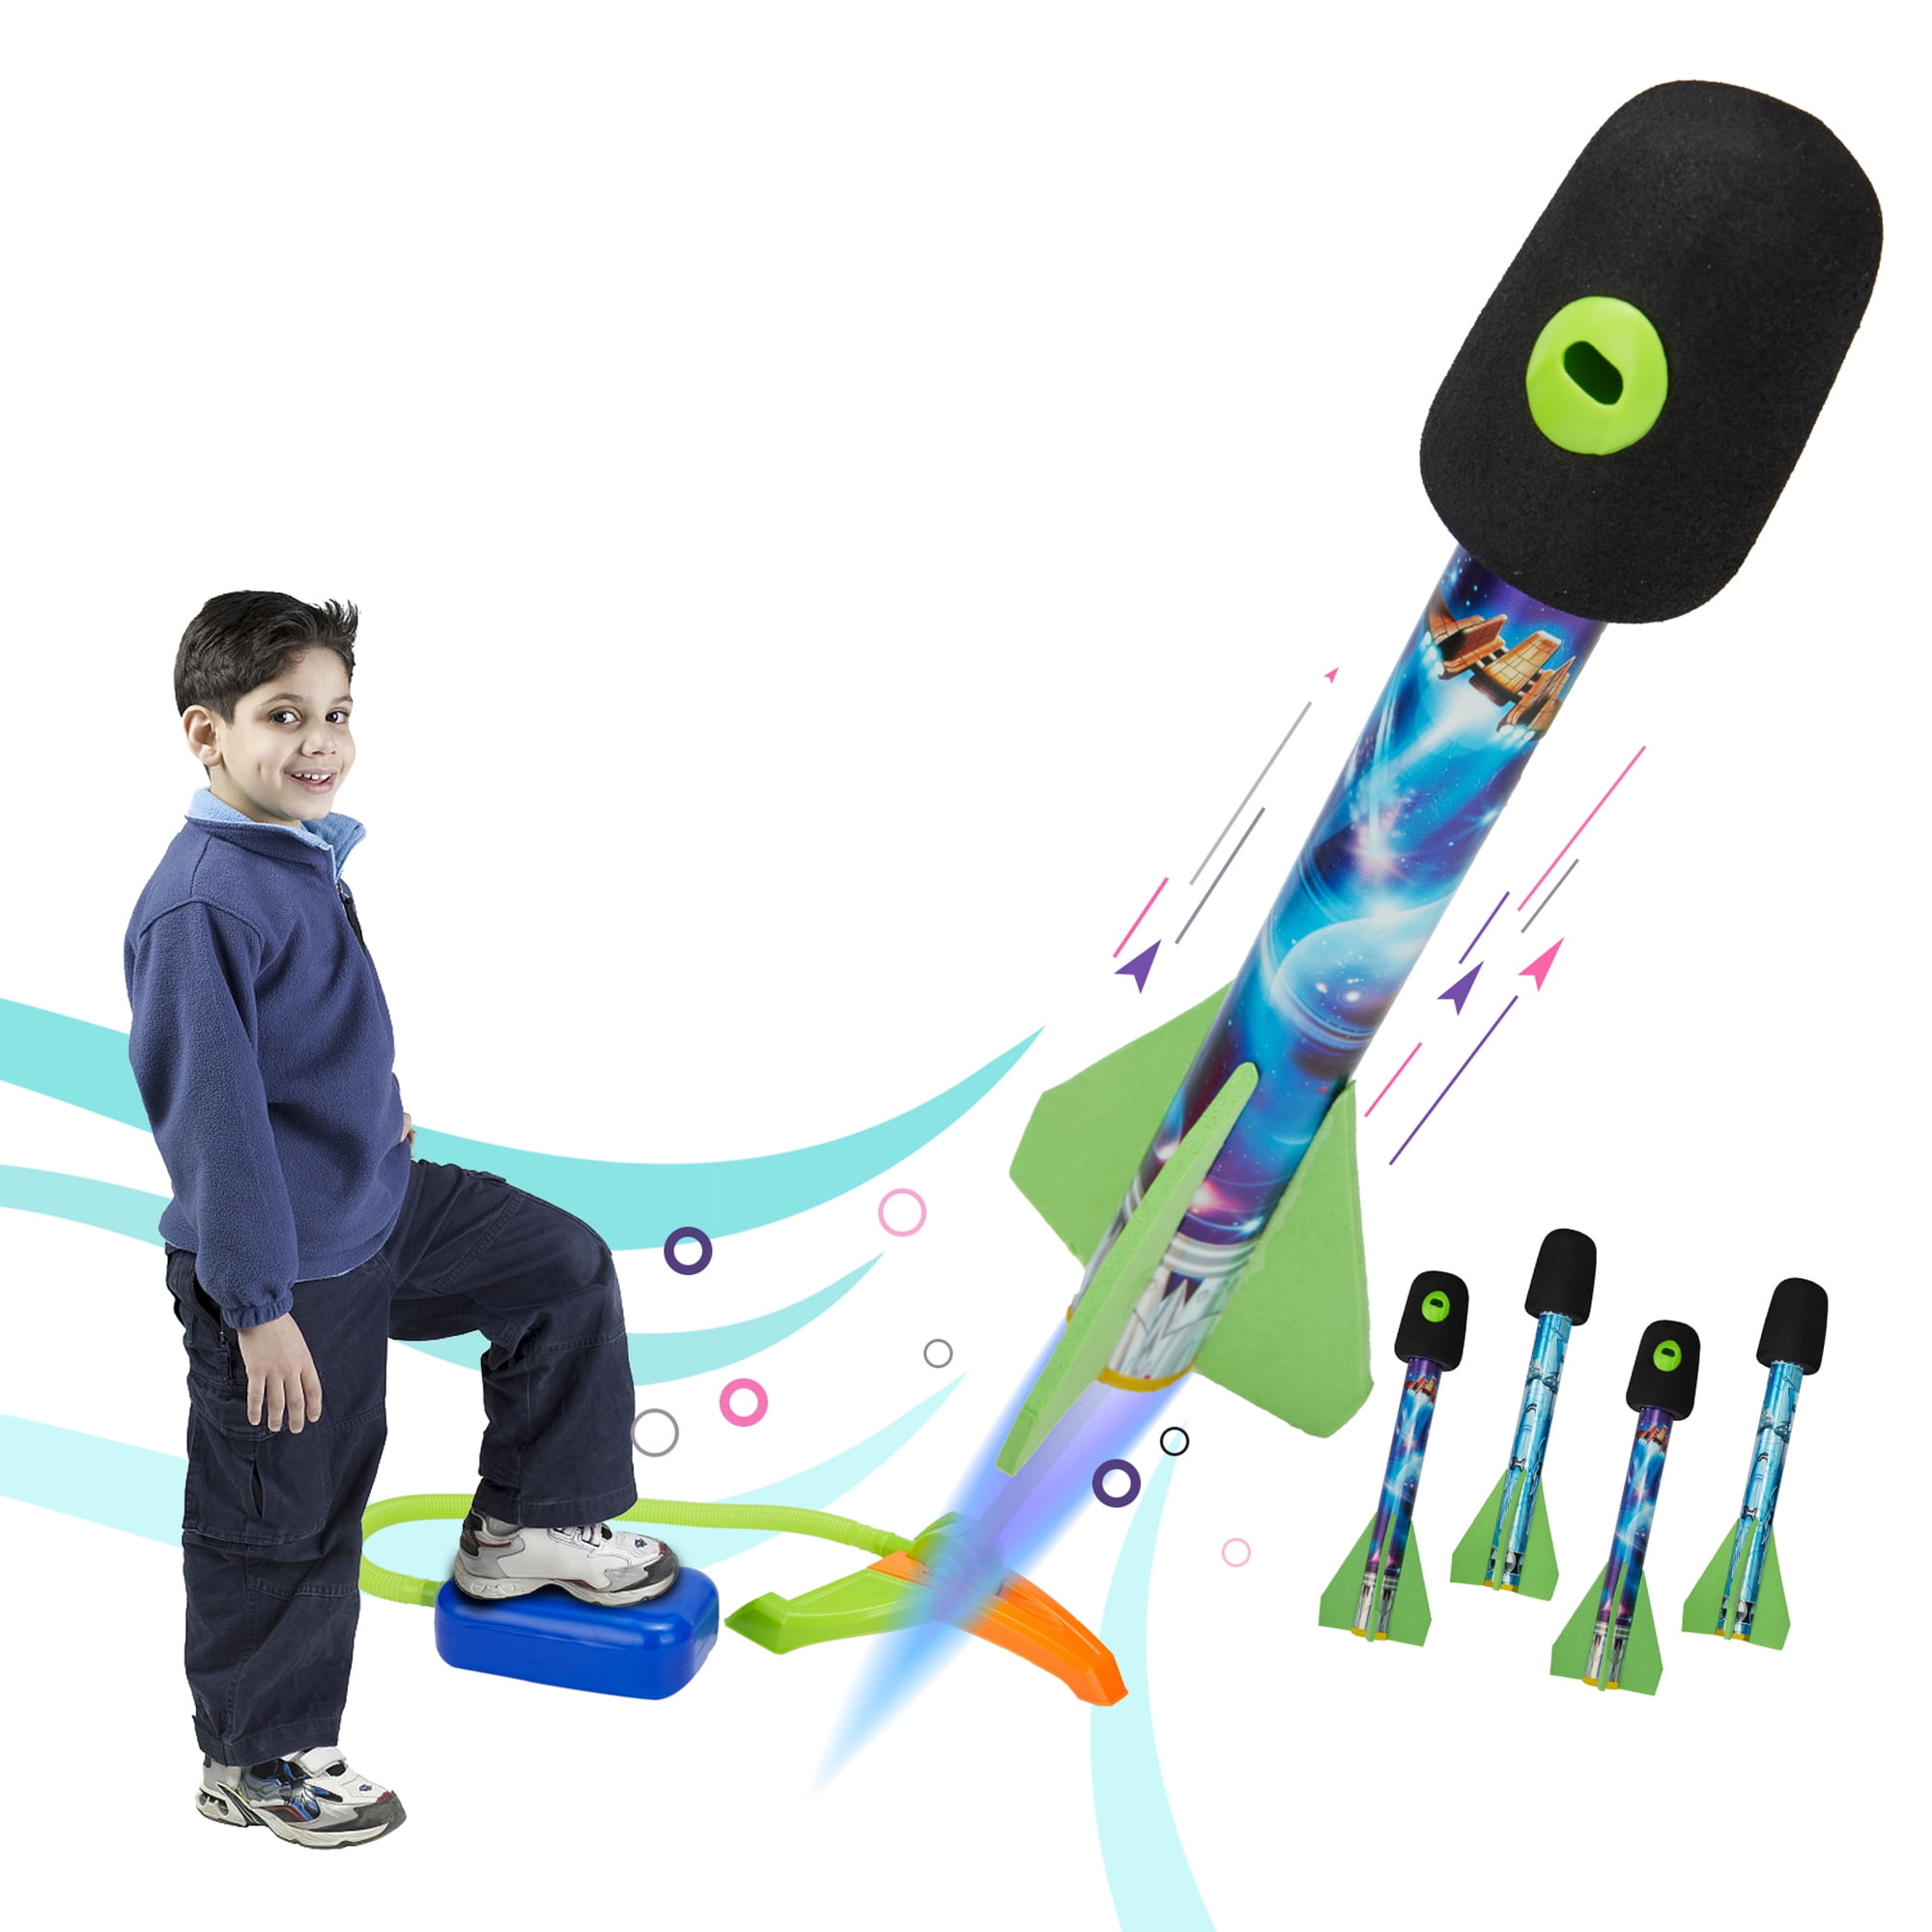 Toy Rocket Launcher for Kids with 4 Rockets and Toy Air Rocket Launcher - Kids Outdoor Rocket STEM Gift for Boys and Girls Ages 5 Years and Up - Great for Outdoor Play